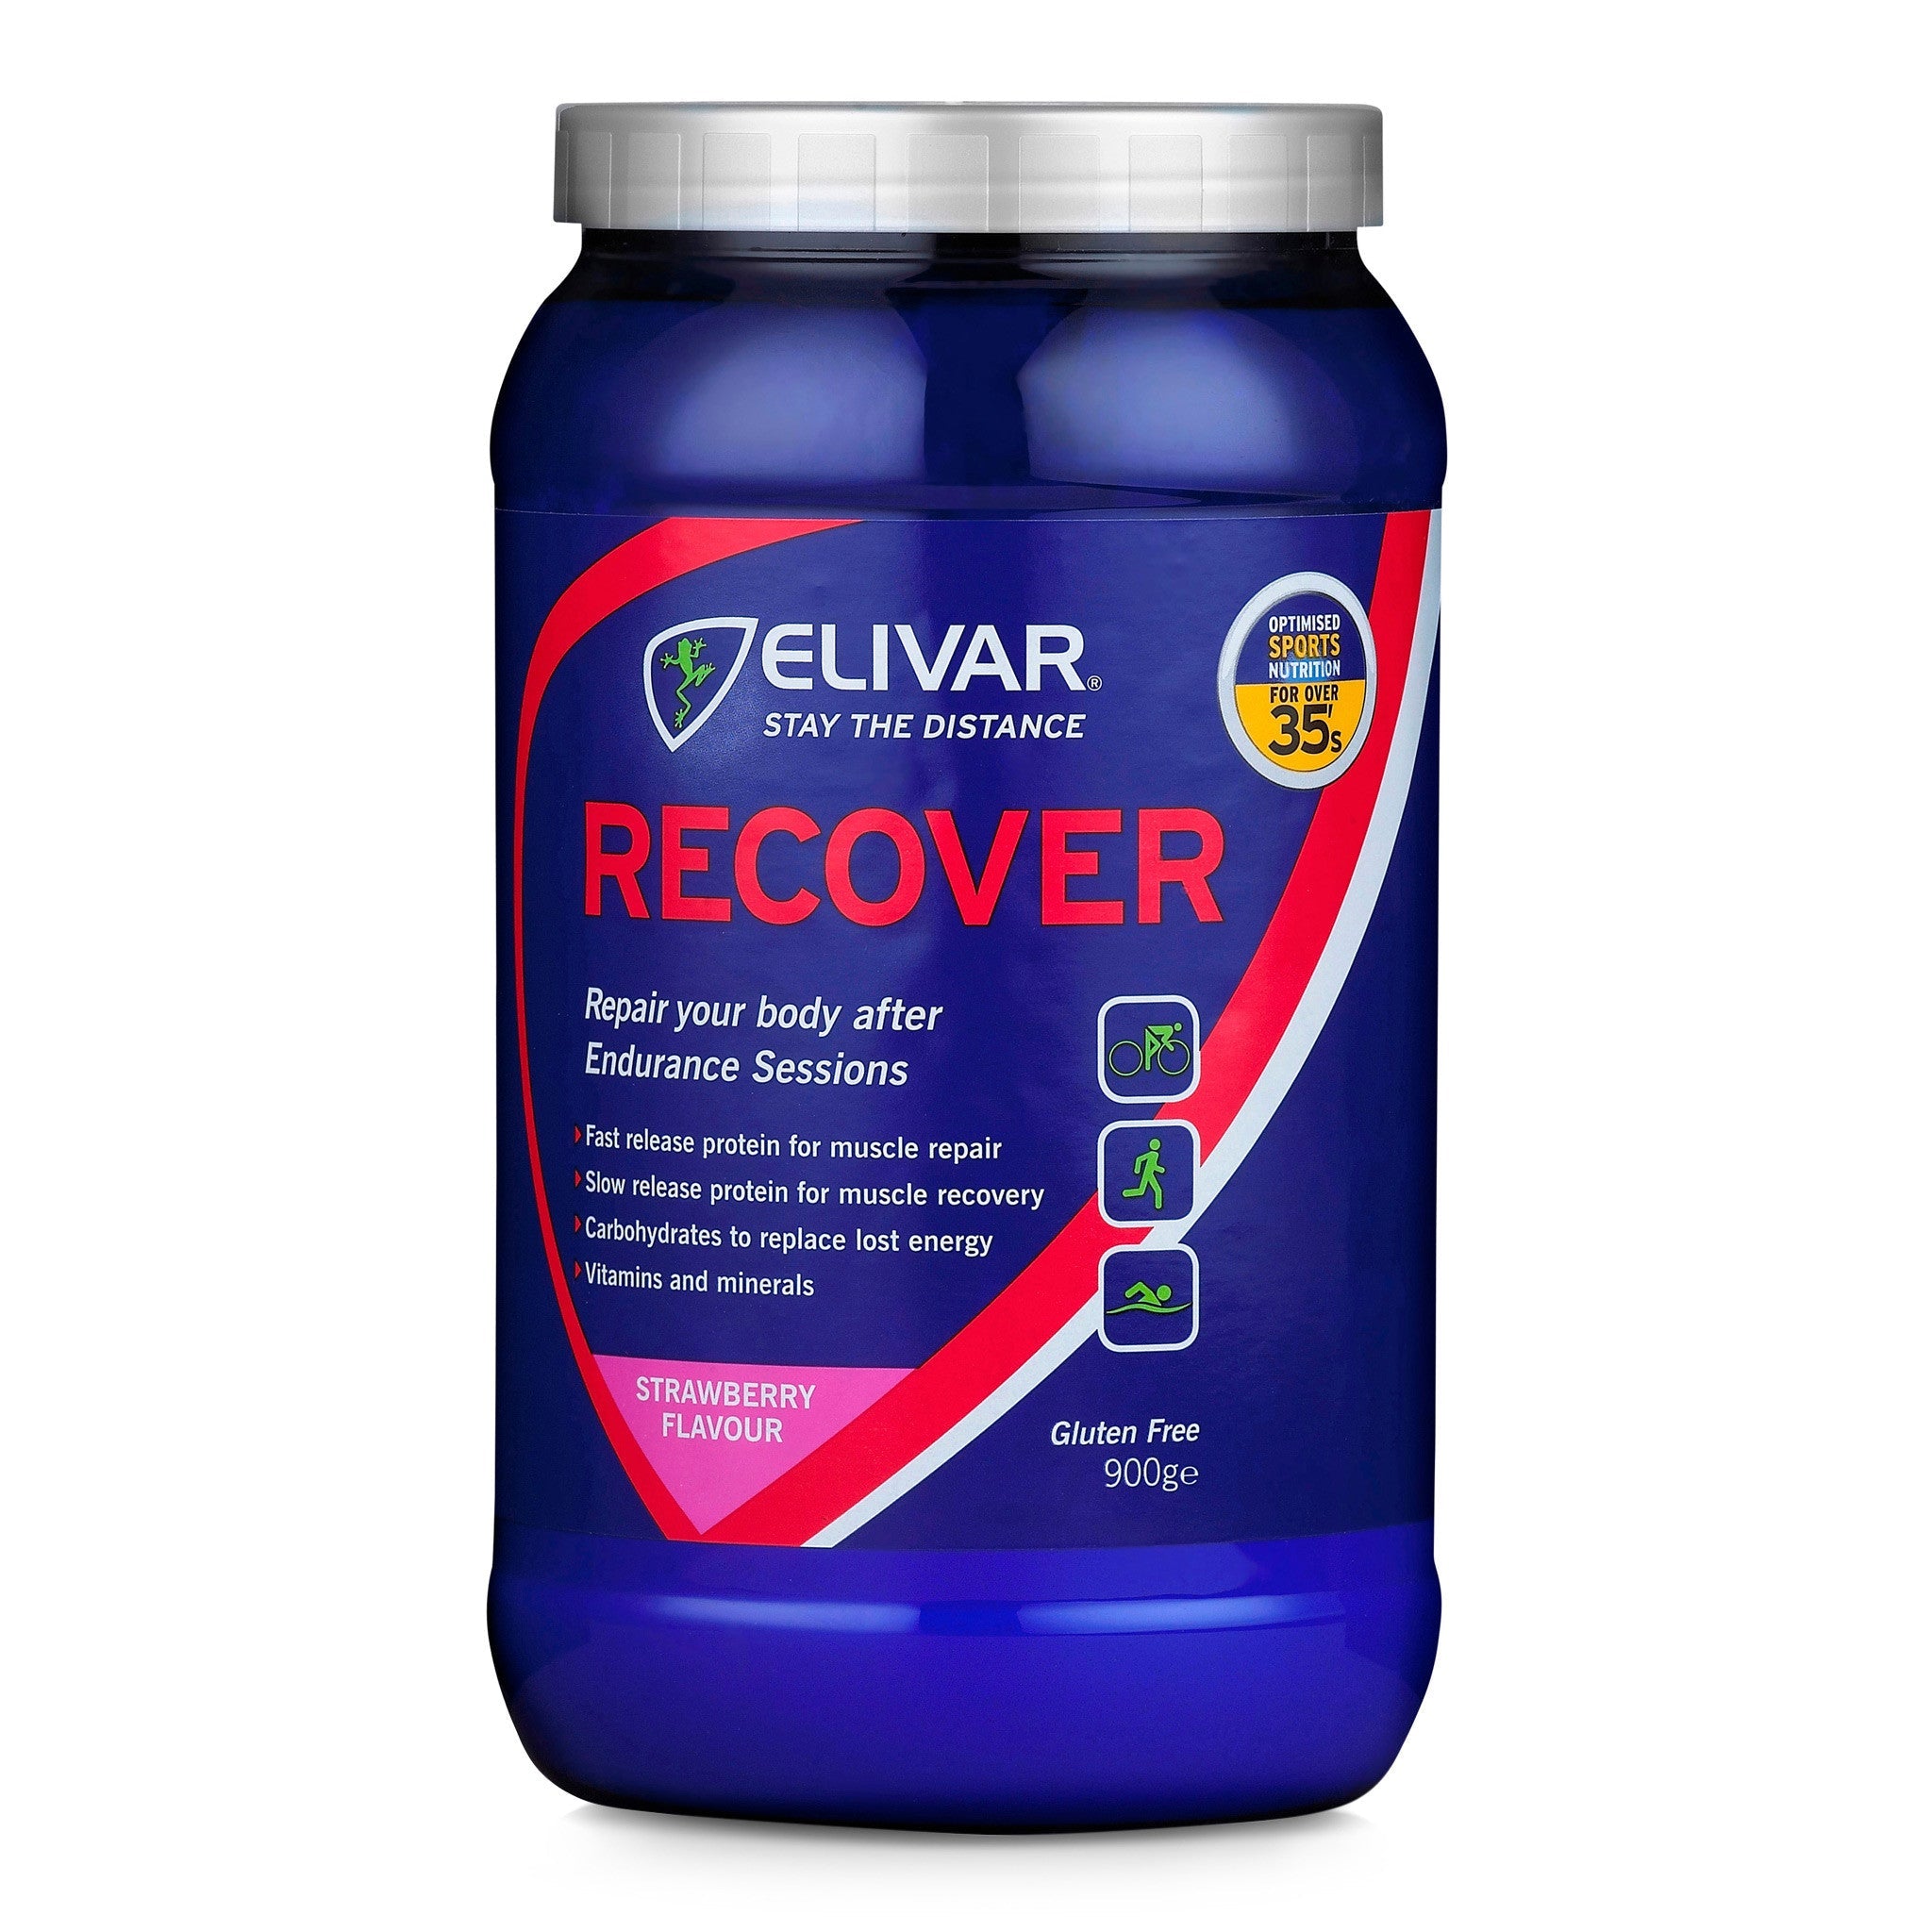 Recover - Post-training Energy and Protein Recovery Drink Mix - 900g Tub - Strawberry Flavour